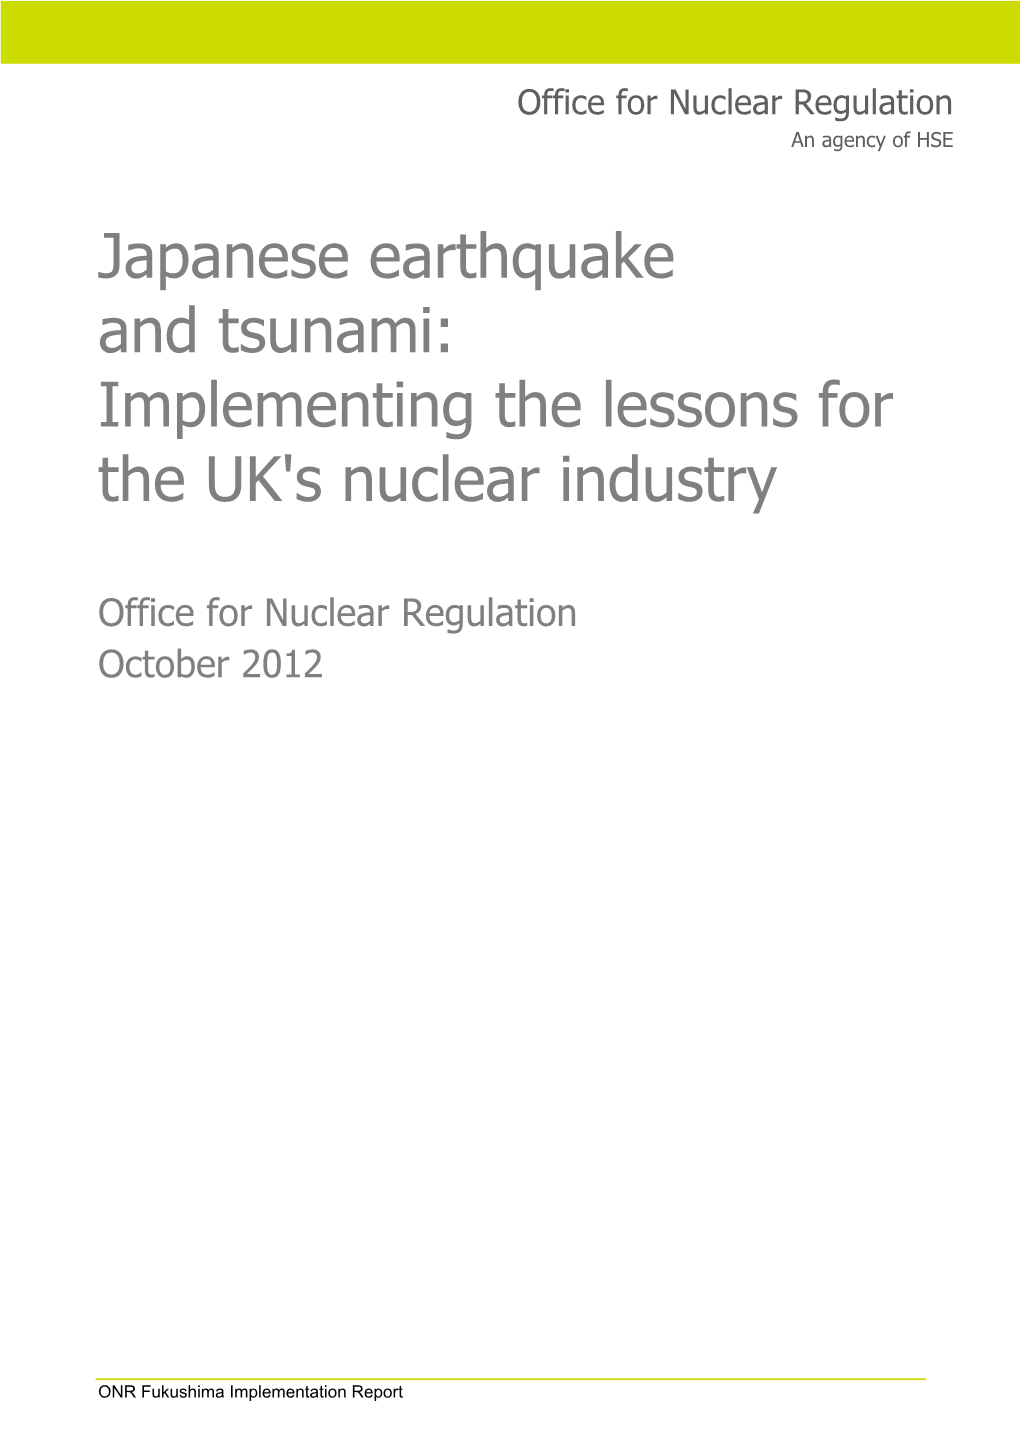 Japanese Earthquake and Tsunami: Implementing the Lessons for the UK's Nuclear Industry